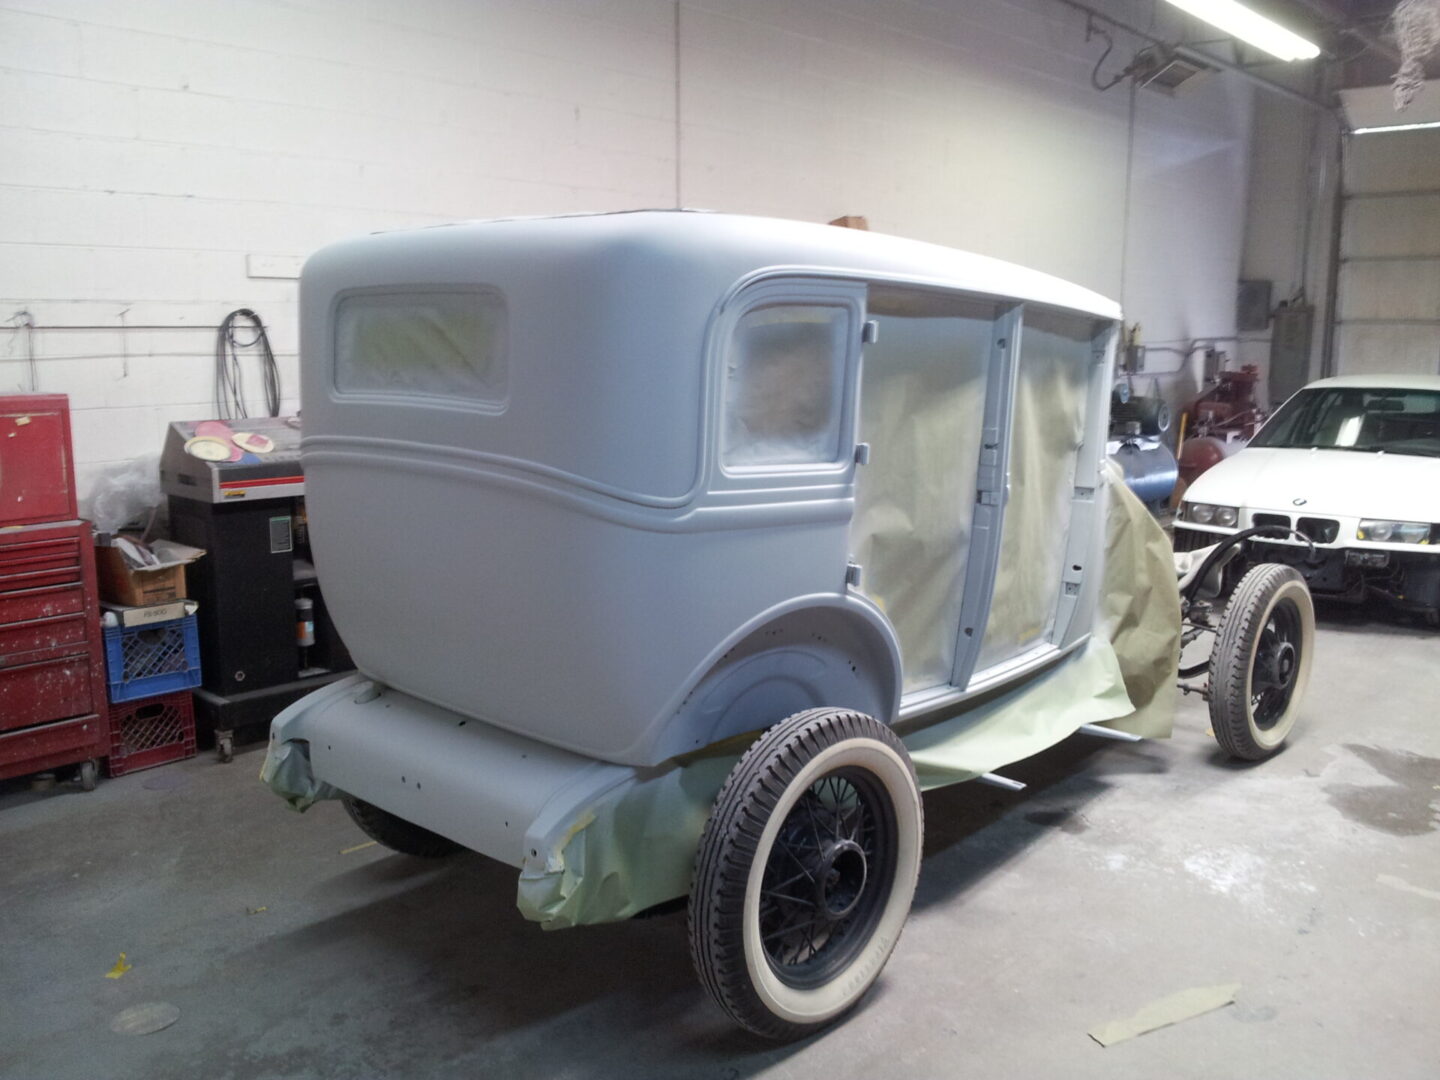 A white painted 1930 Chevrolet